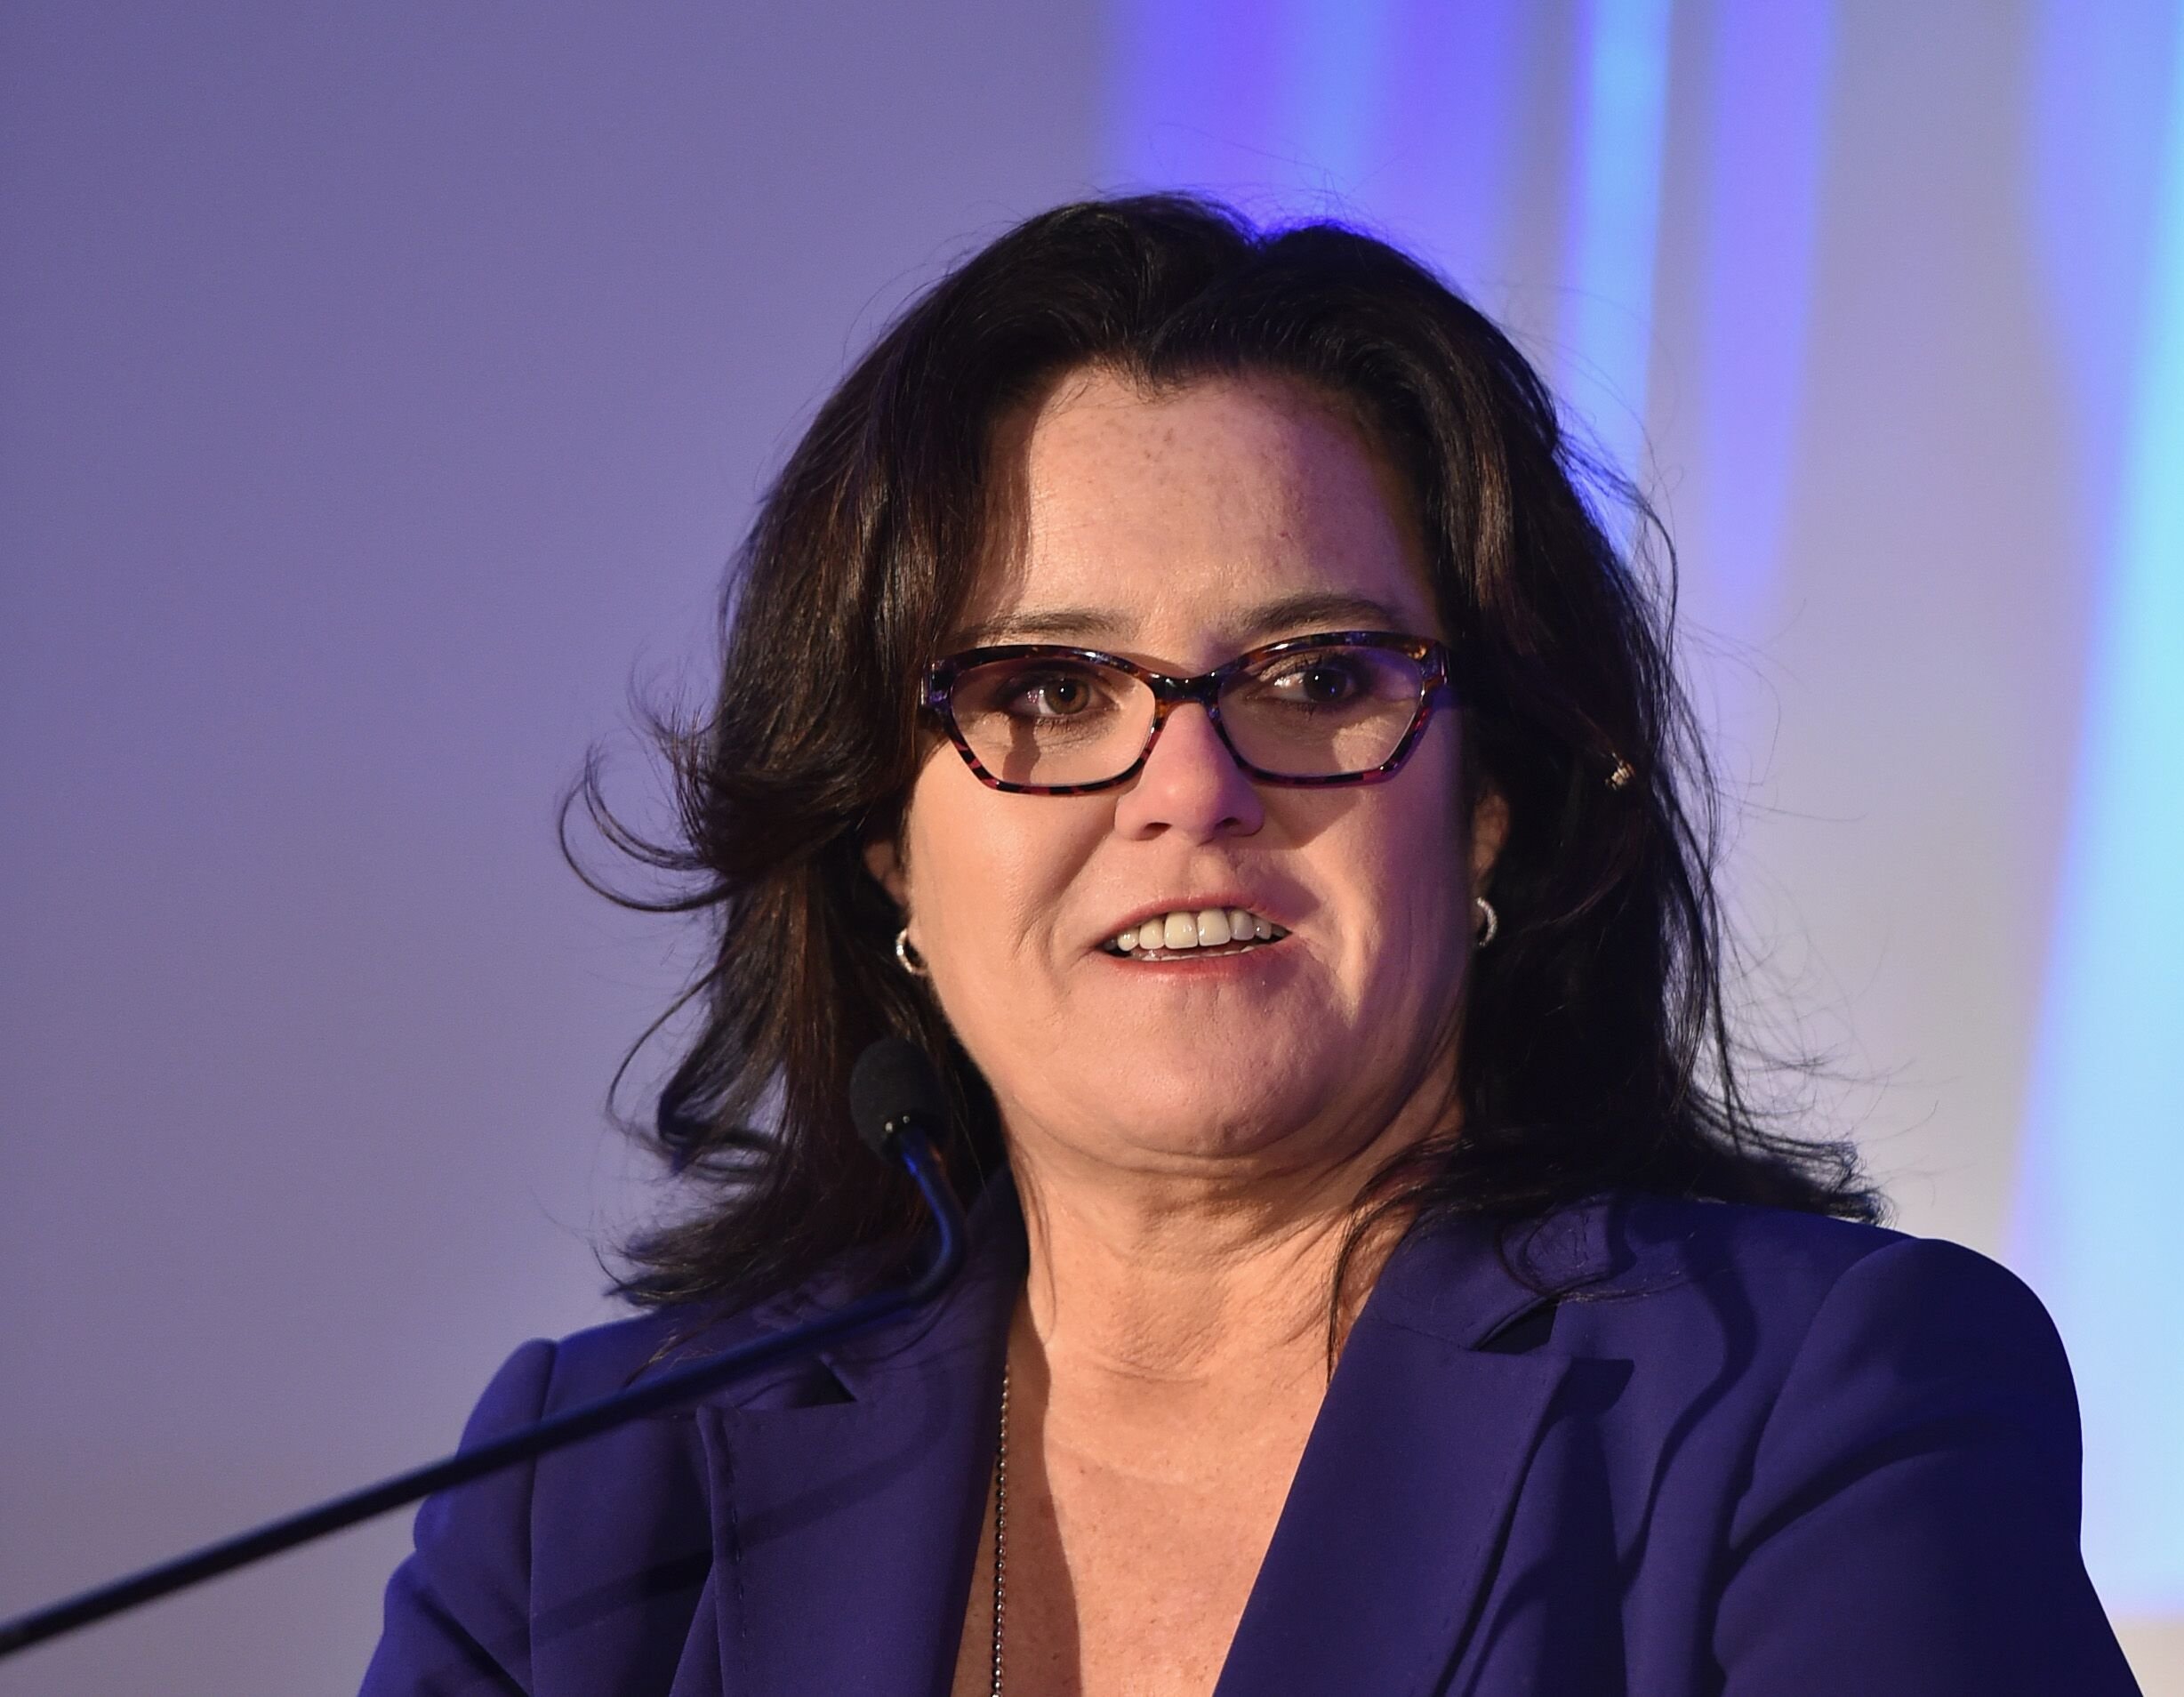 Rosie O'Donnell speaks during the 5th Annual Athena Film Festival Ceremony & Reception on February 7, 2015 | Photo: Getty Images